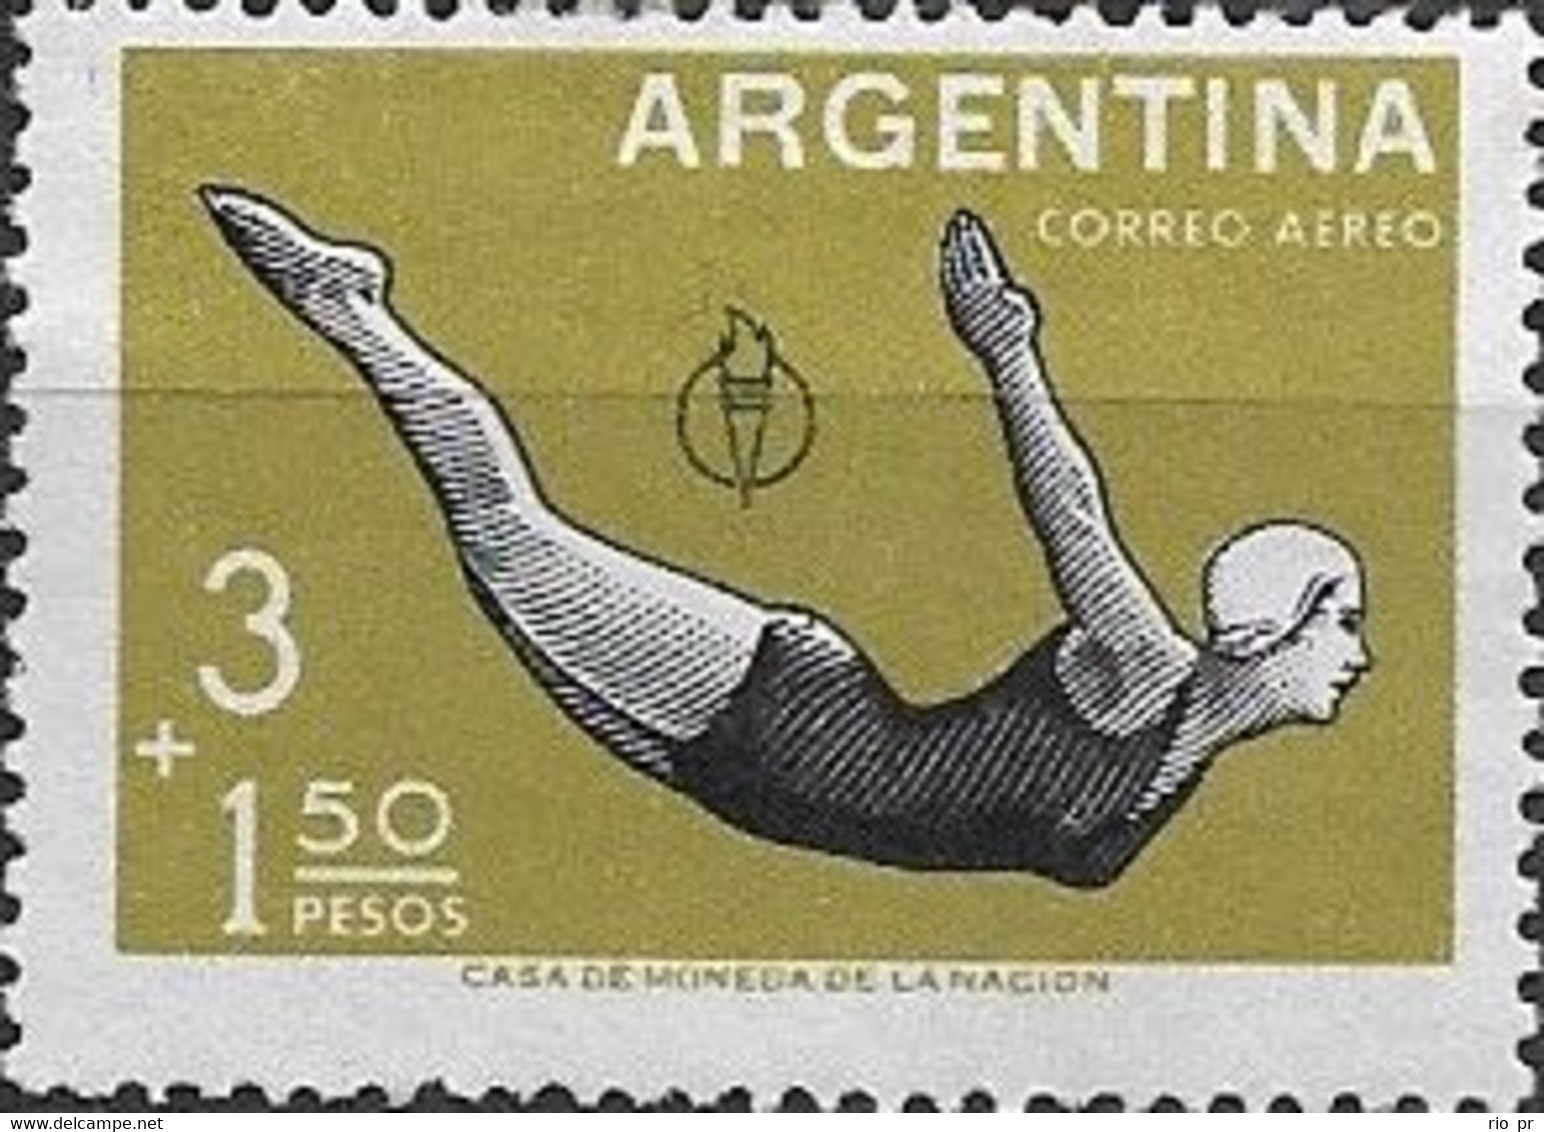 ARGENTINA - 3rd PANAMERICAN GAMES, CHICAGO/USA (DIVING) 1959 - MNH - Diving